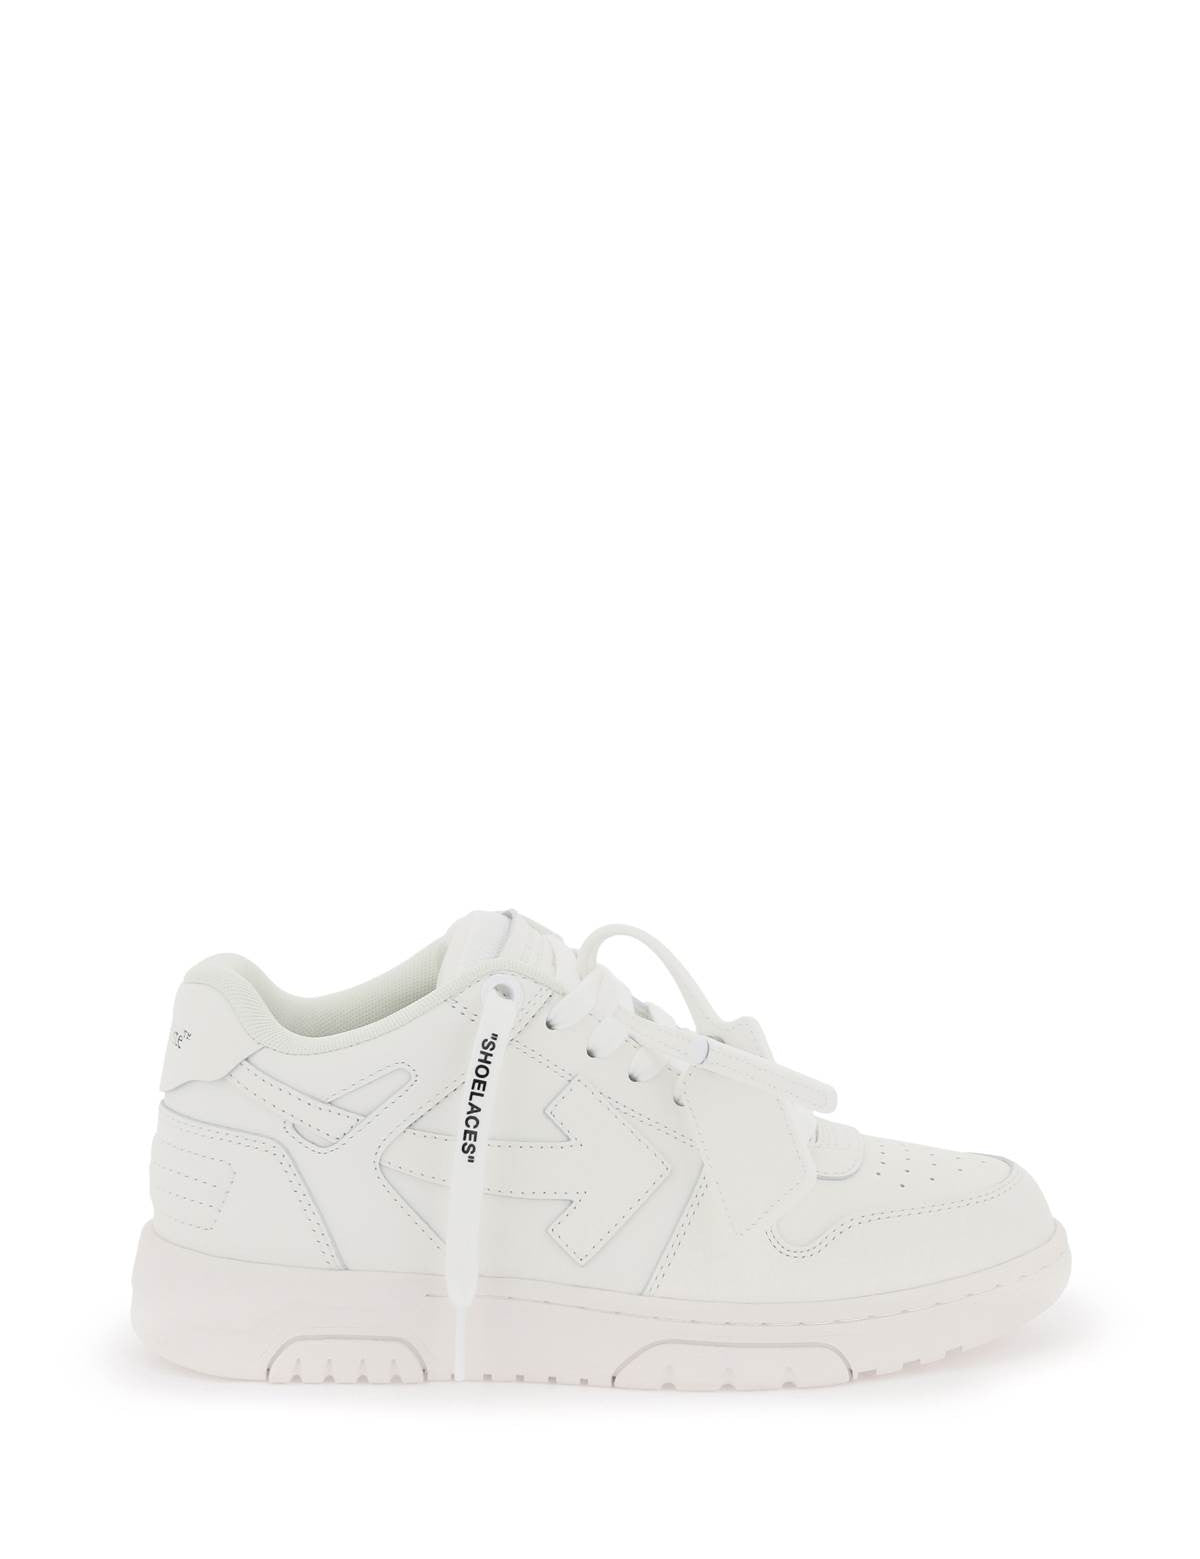 off-white-out-of-office-sneakers_25fba03d-7019-43cb-9eb3-92e40bb5386a.jpg